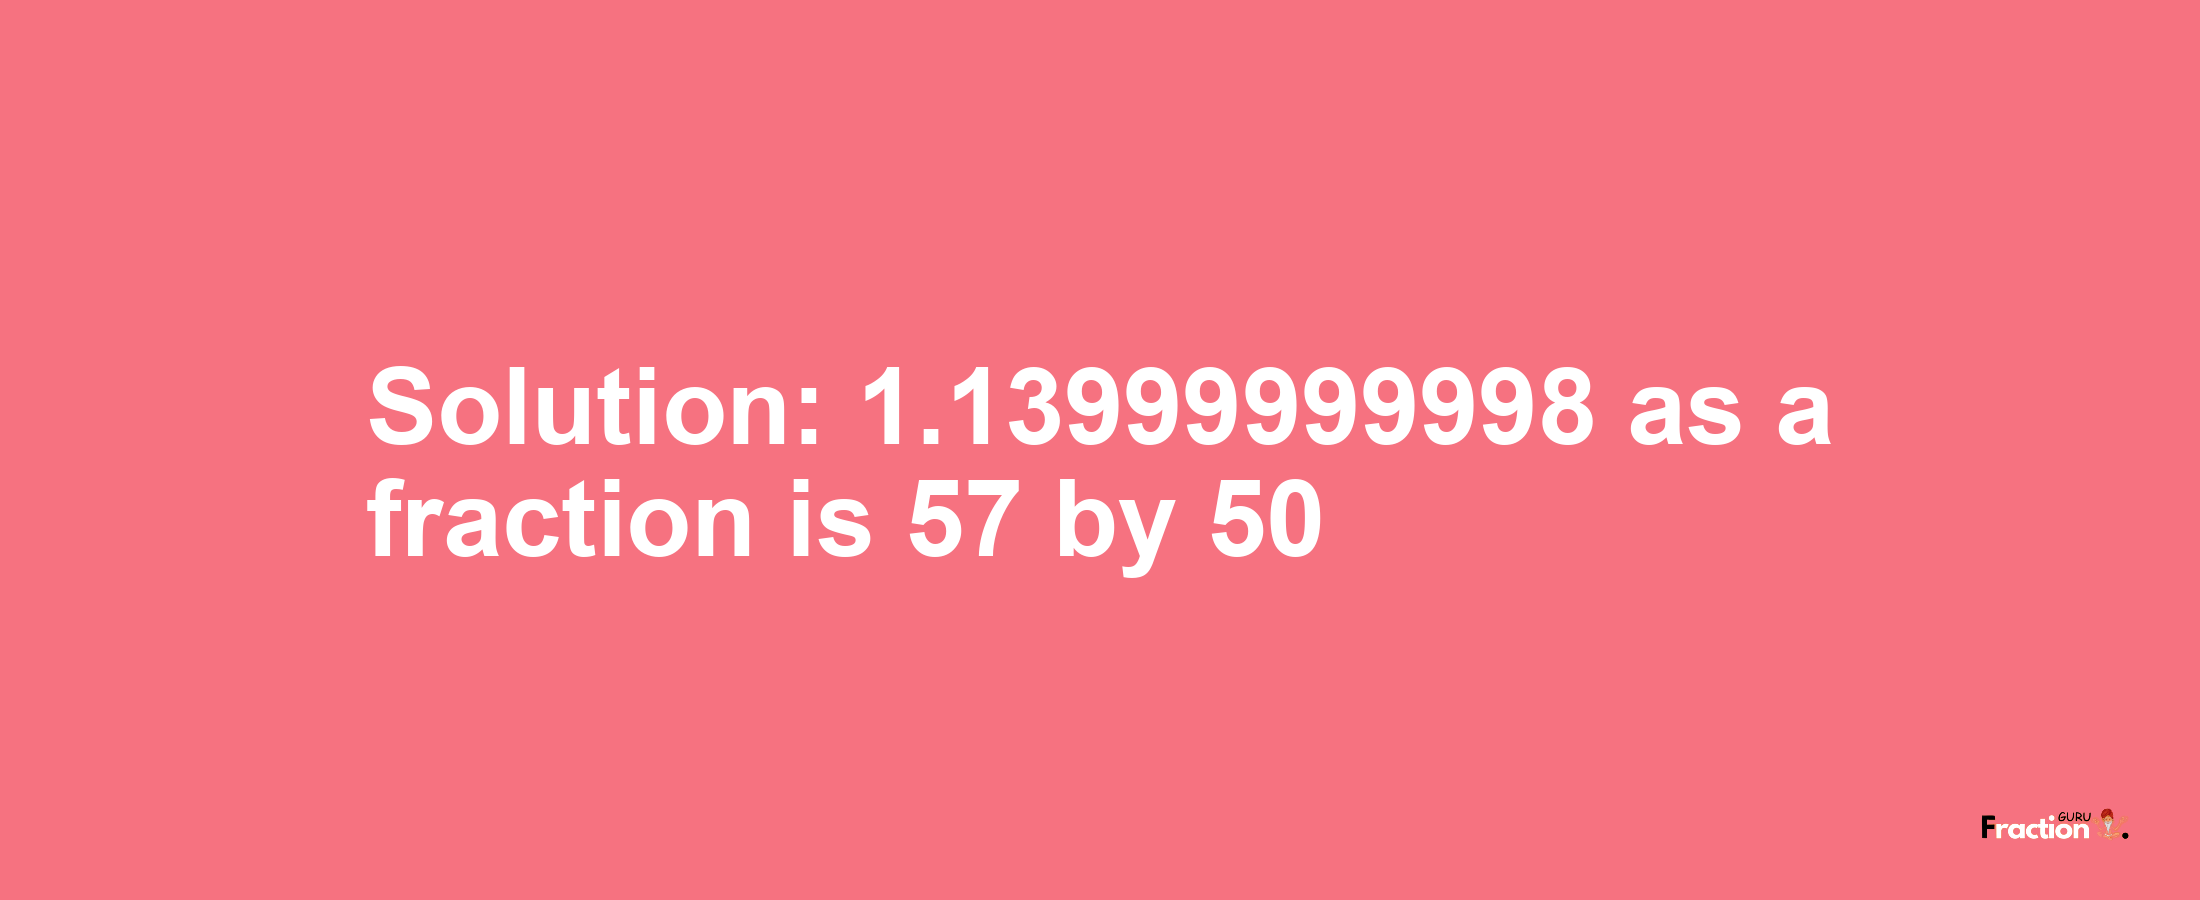 Solution:1.13999999998 as a fraction is 57/50